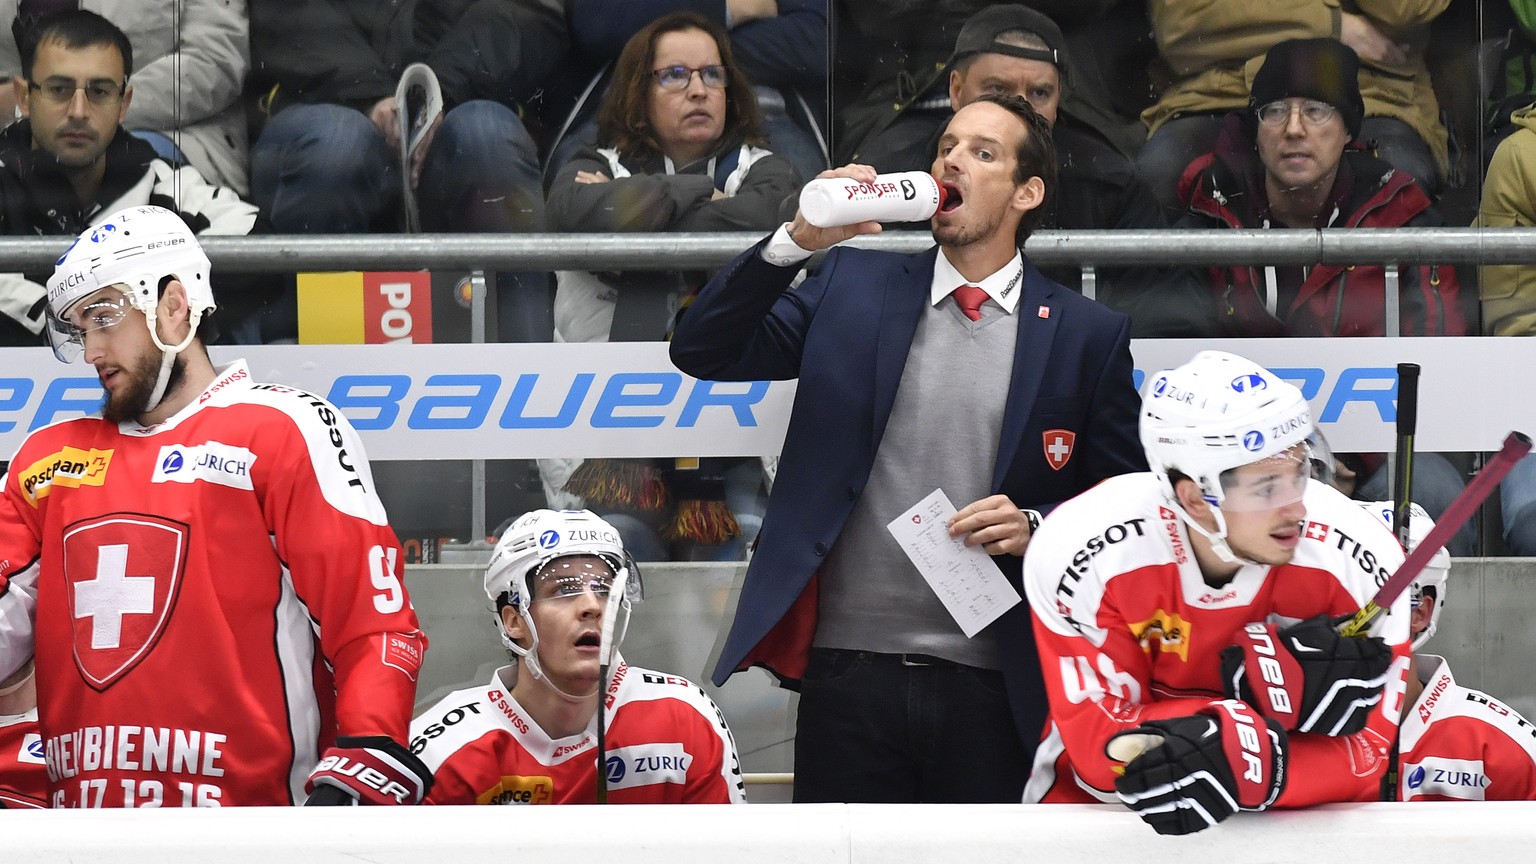 Switzerland’s head coach Patrick Fischer, 2.from right, reacts during the Ice Hockey Deutschland Cup at the Curt-Frenzel-Eisstadion in Augsburg, Germany, Sunday, November 6, 2016. (KEYSTONE/Peter Schn ...